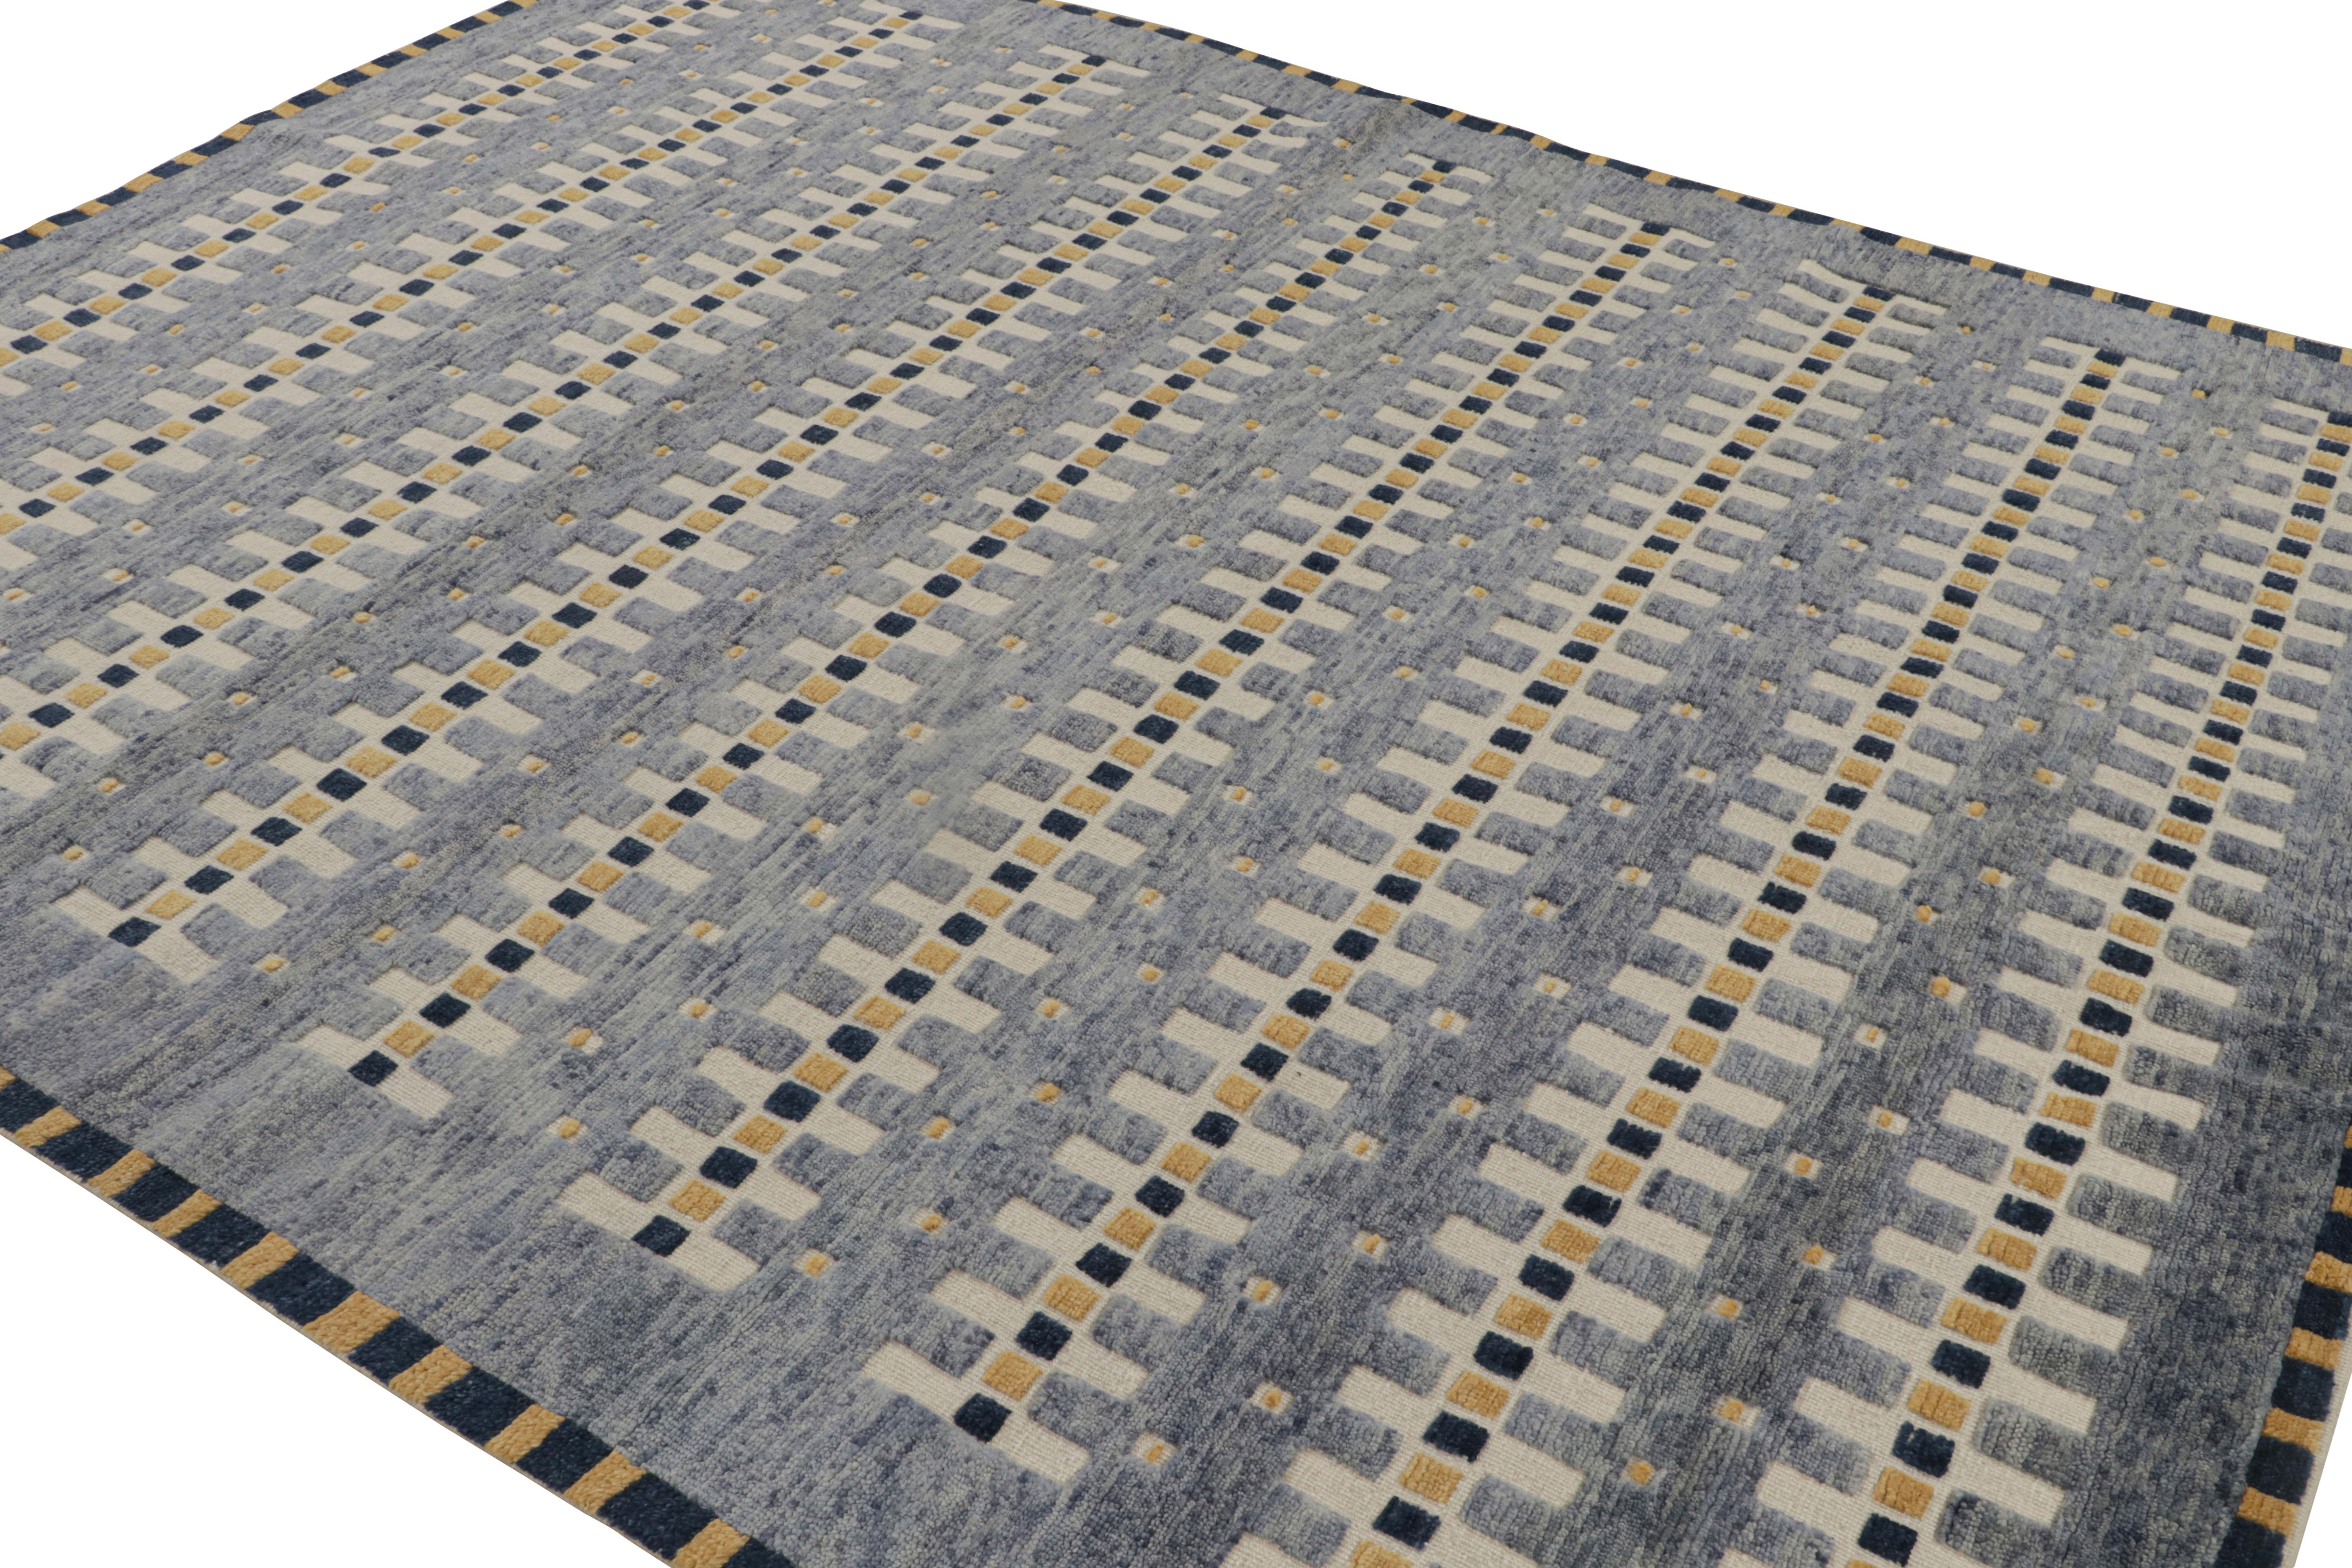 Hand-knotted in wool, this 8x10 Scandinavian kilim rug features geometric patterns in the Swedish minimalist-meets-mid-century modern look. 

On the design: 

Admirers of the craft may admire the pattern and texture of this rug that are married to